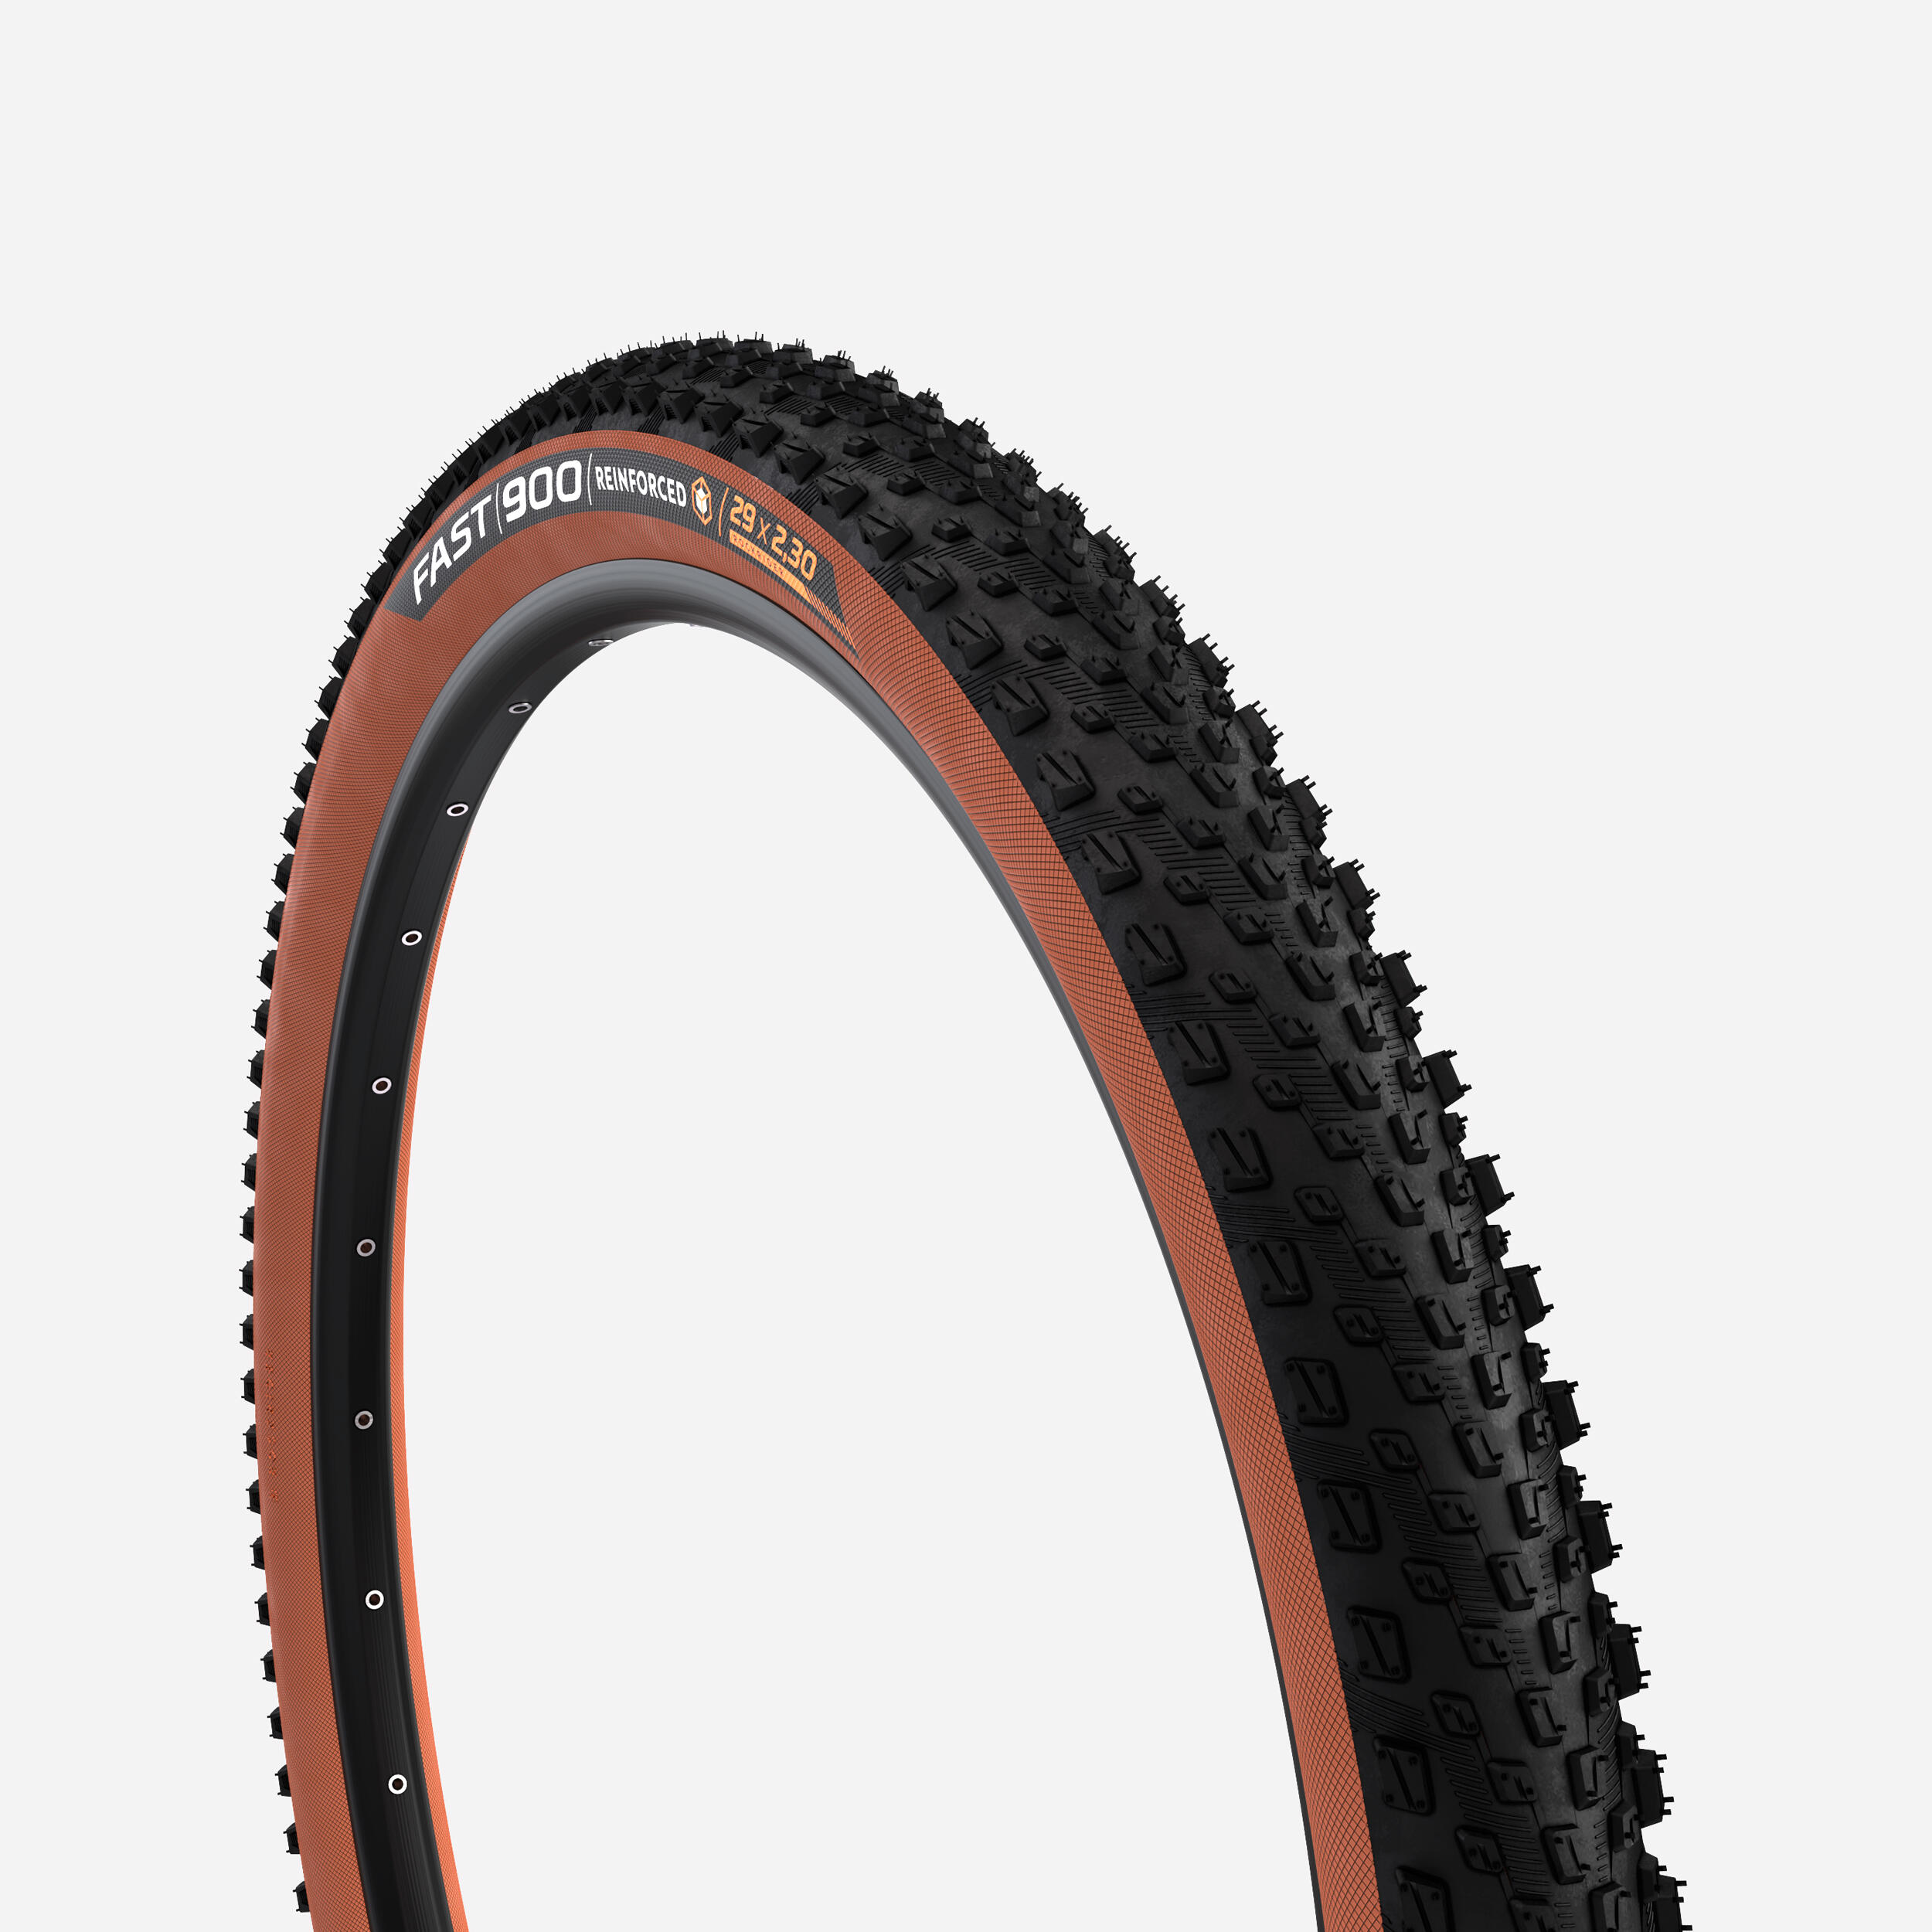 ROCKRIDER 29 x 2.30 Mountain Bike Cross-Country Tyre XC Fast 900 Reinforced Tanwall